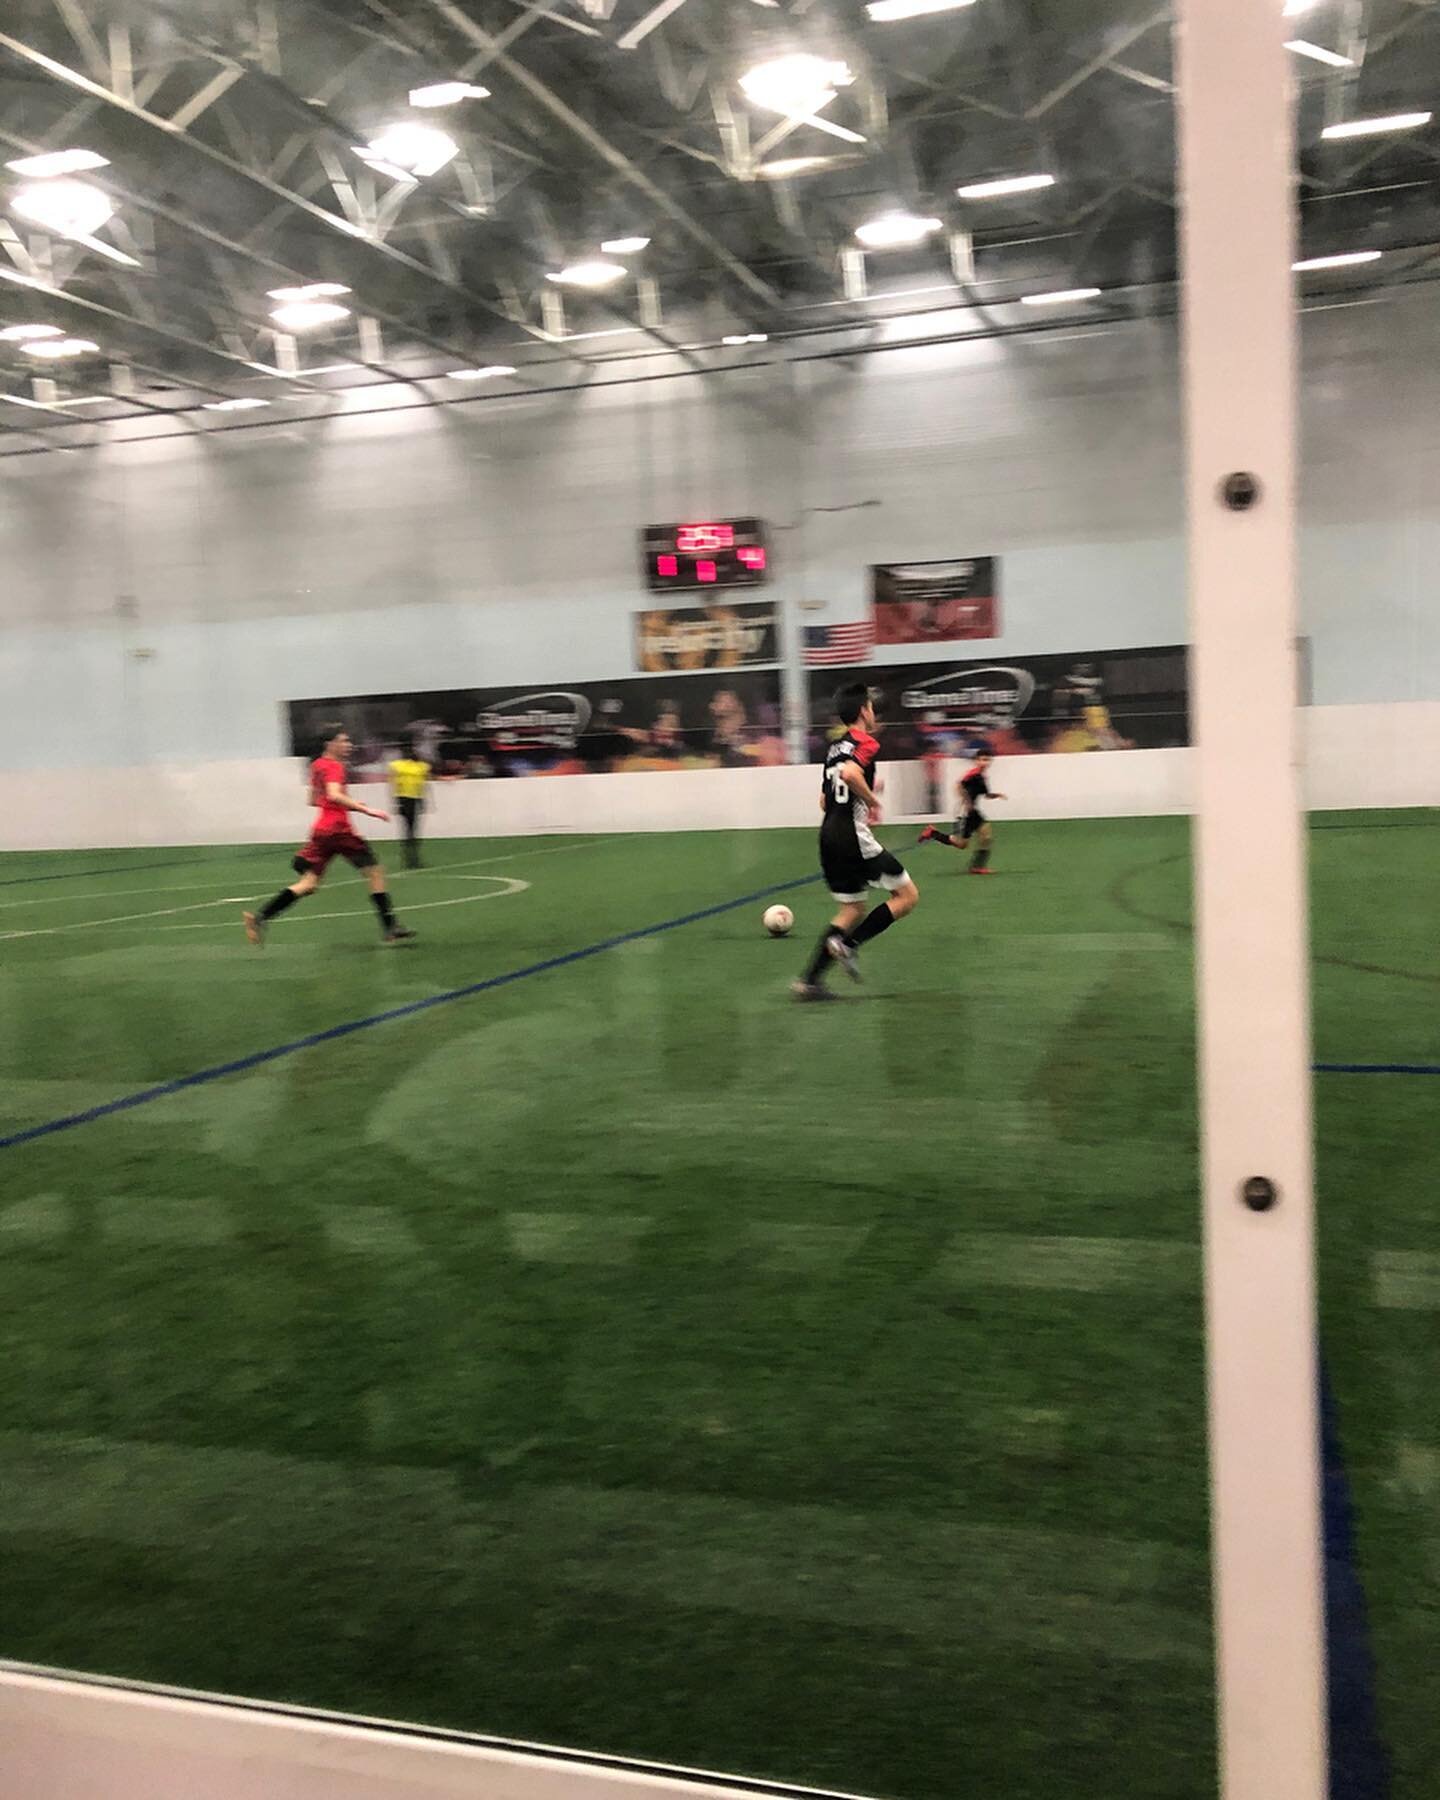 Despite how the weather feels, we still have a while to wait before spring! But the Butler Fury teams have been keeping up their skills by playing indoors at Game Time Training Center for the winter season. Go Fury!

#butlerfury #soccer #soccerteam #